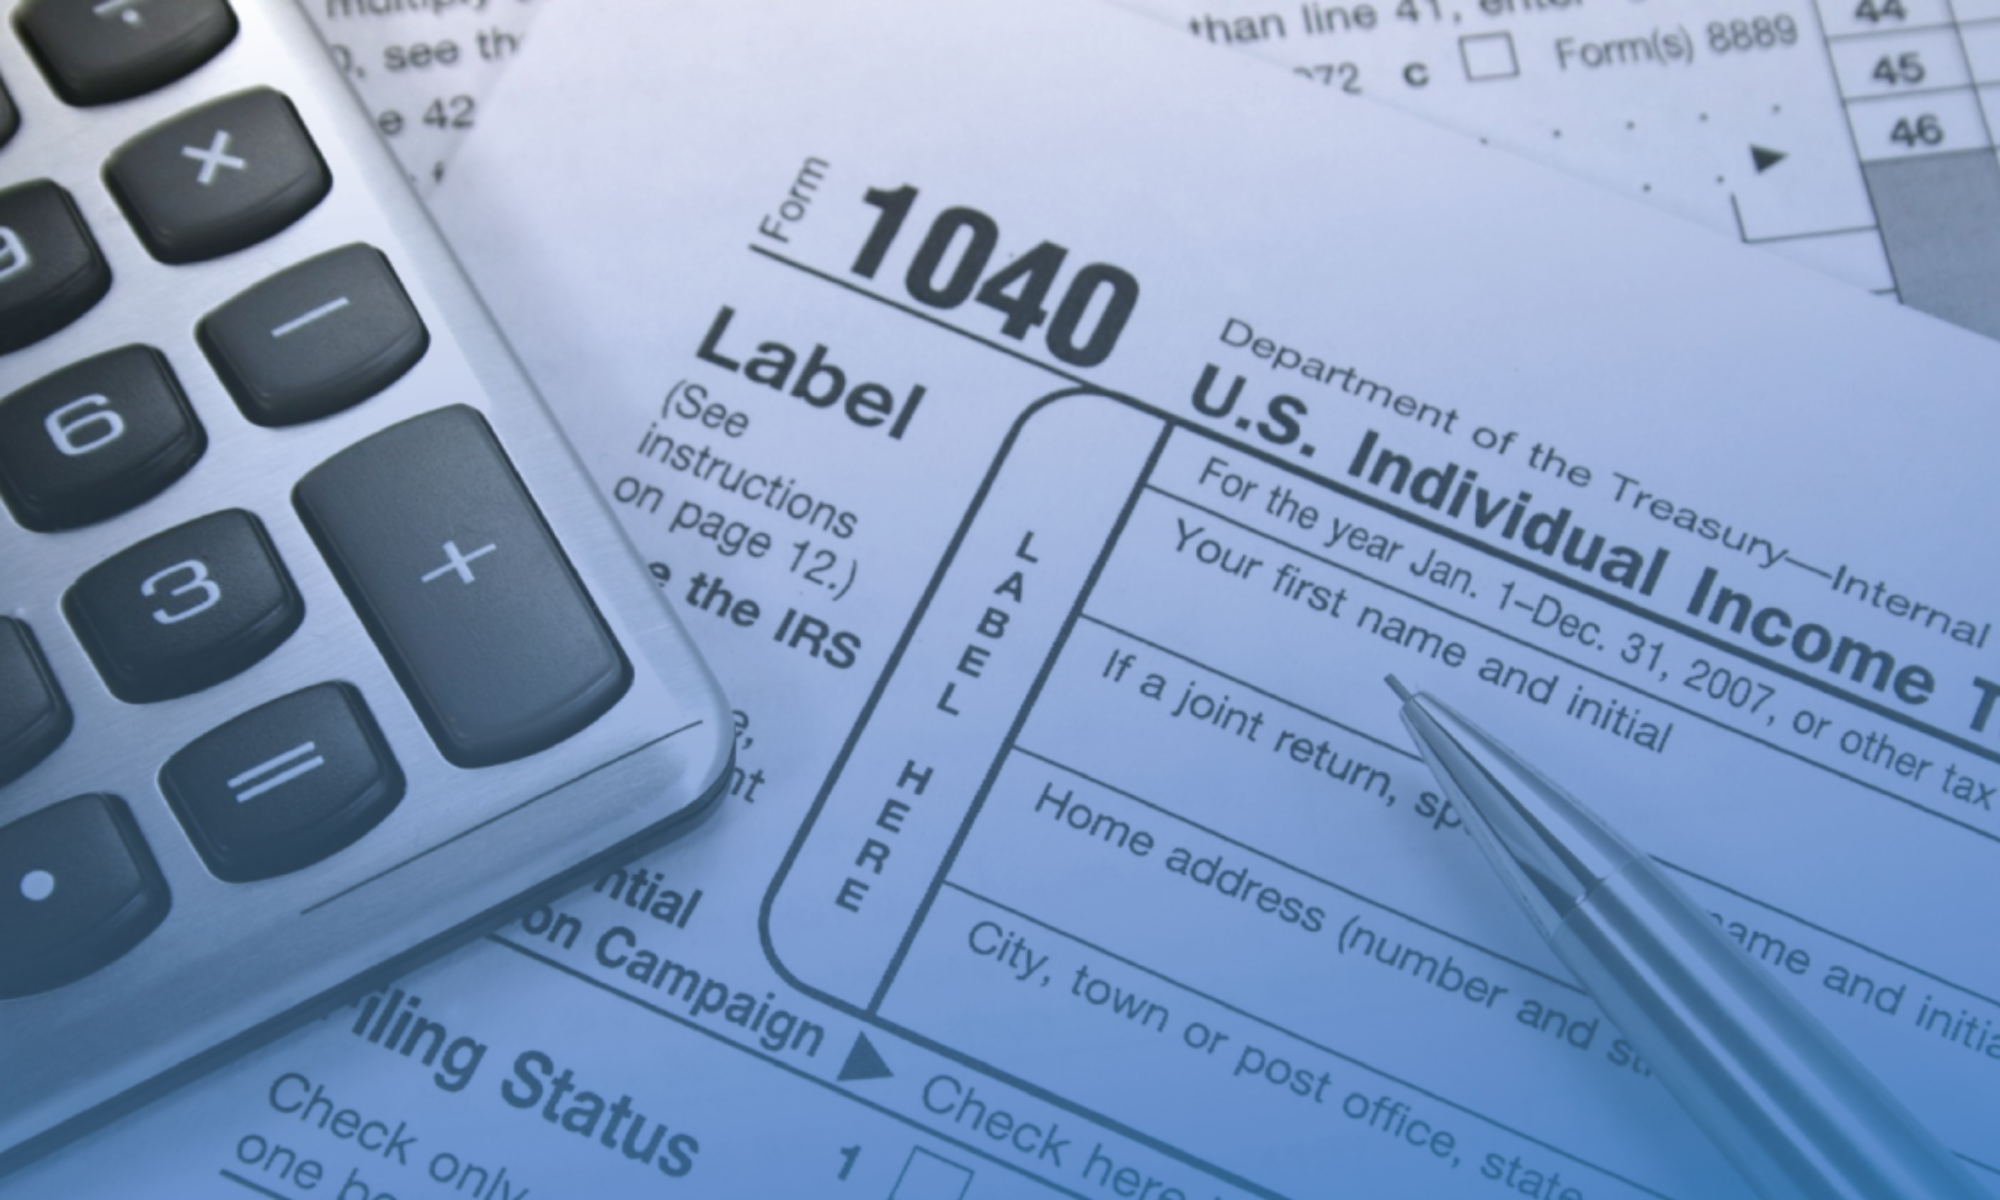 USA Income Tax Professionals | 26777 Lorain Rd. Suite 308 N. Olmsted, Ohio 44070